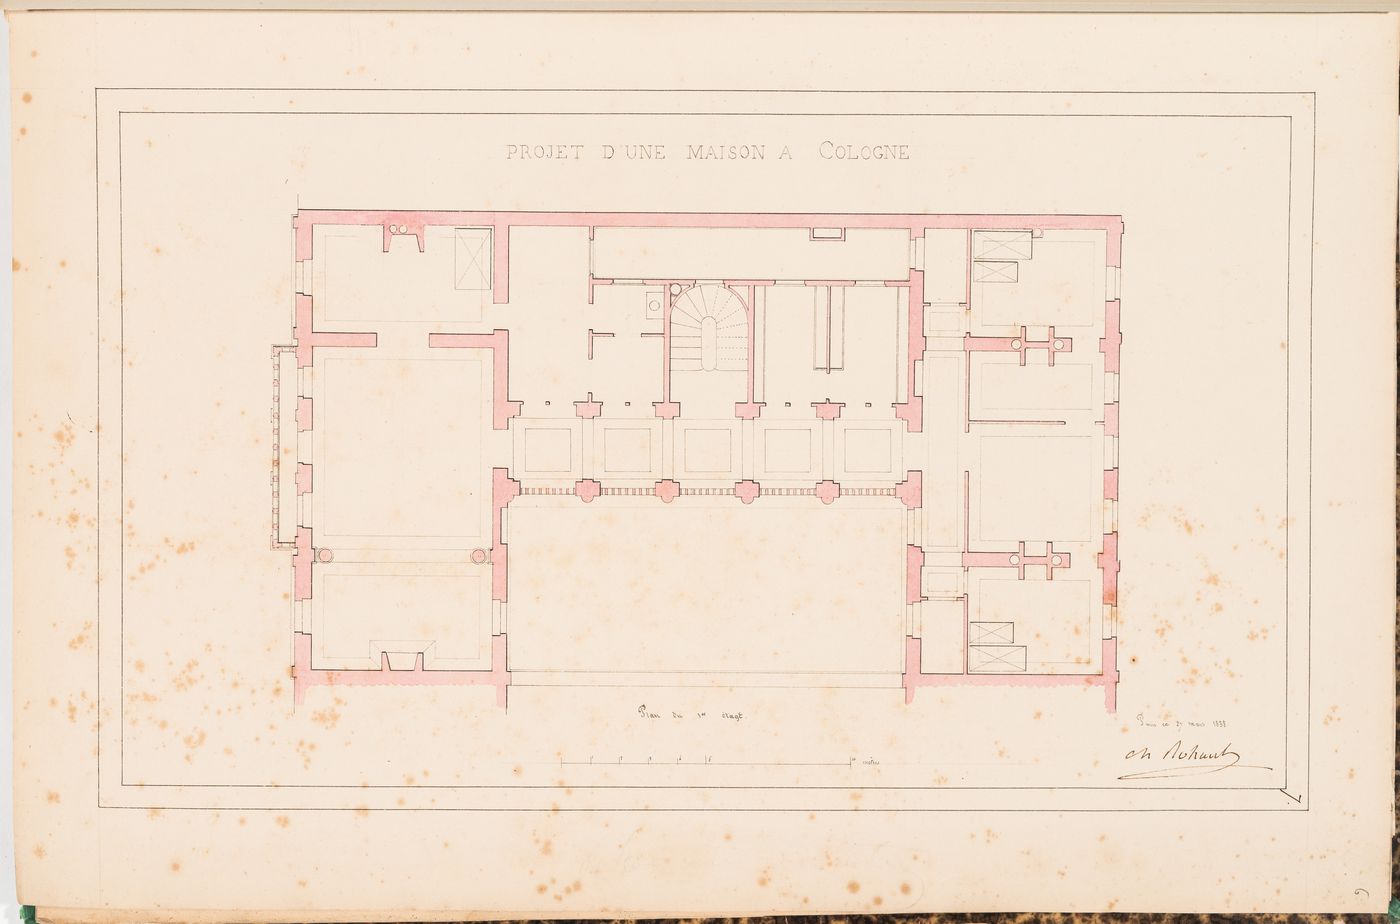 First floor plan for a three-storey house, Cologne